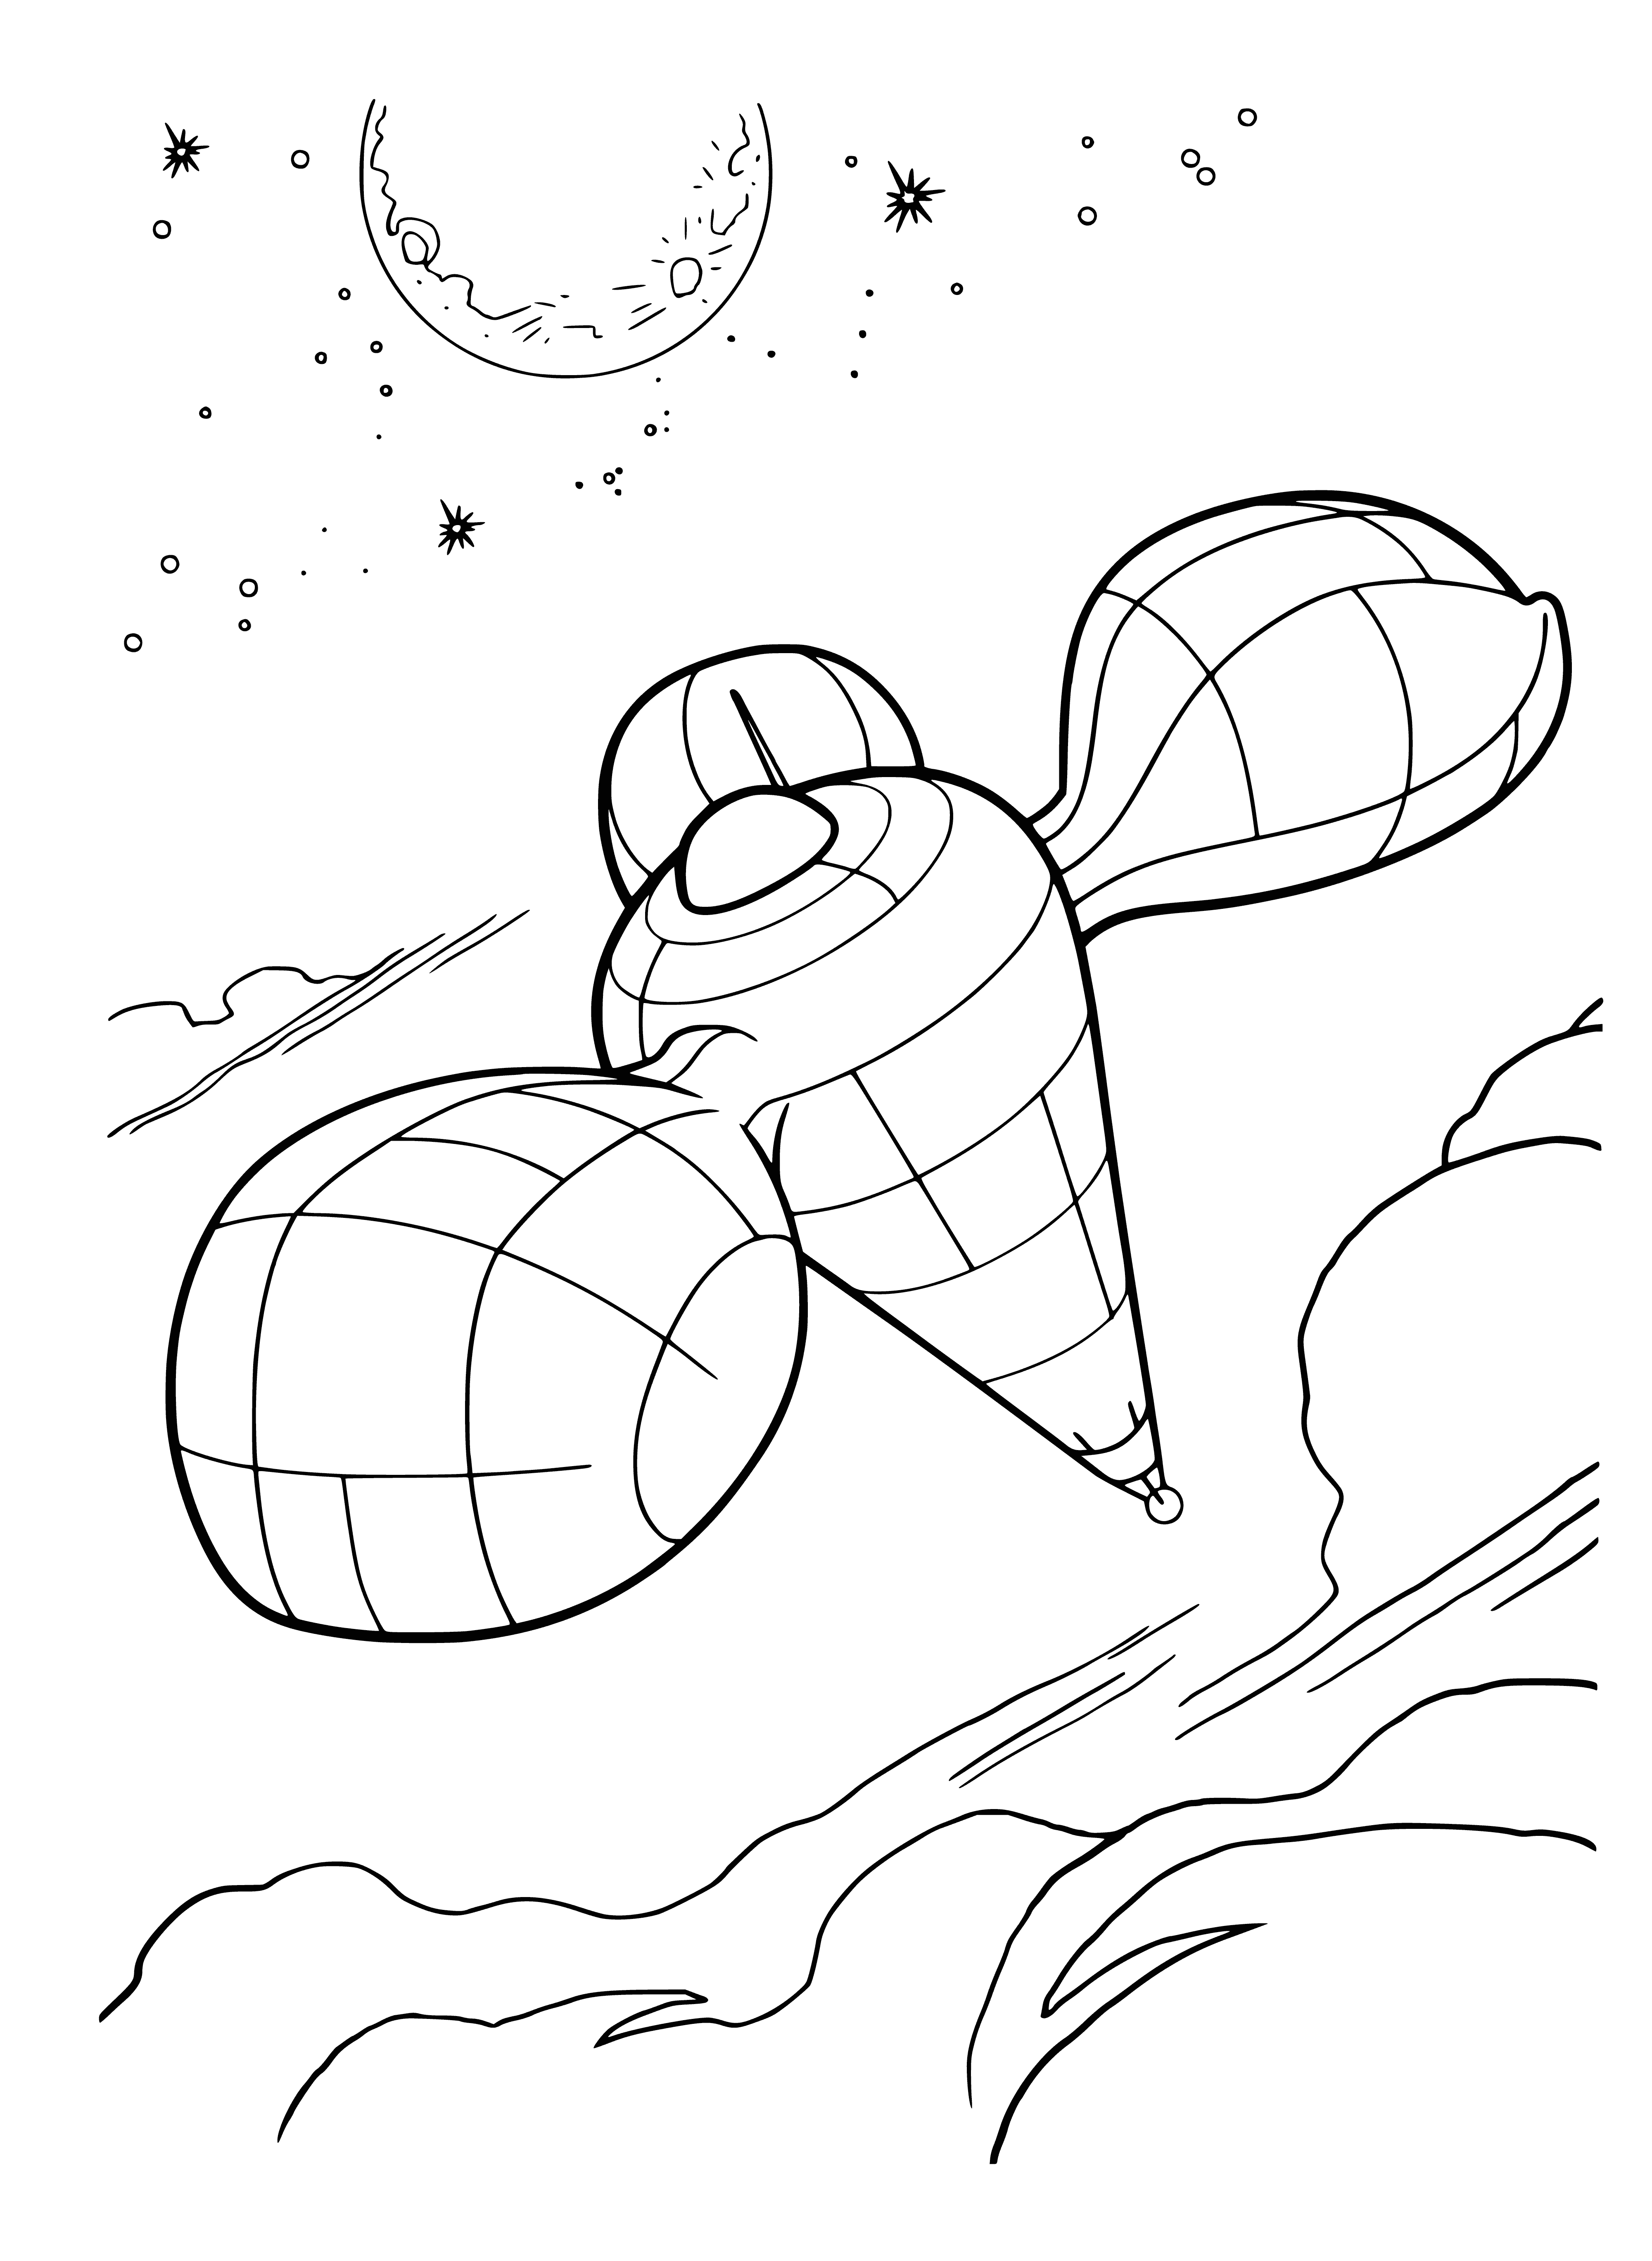 coloring page: Large dark triangle-shaped spaceship w/ bright lights, 2 oval windows, small rect. window, 3 large exhaust pipes on back & 2 small ones on sides.